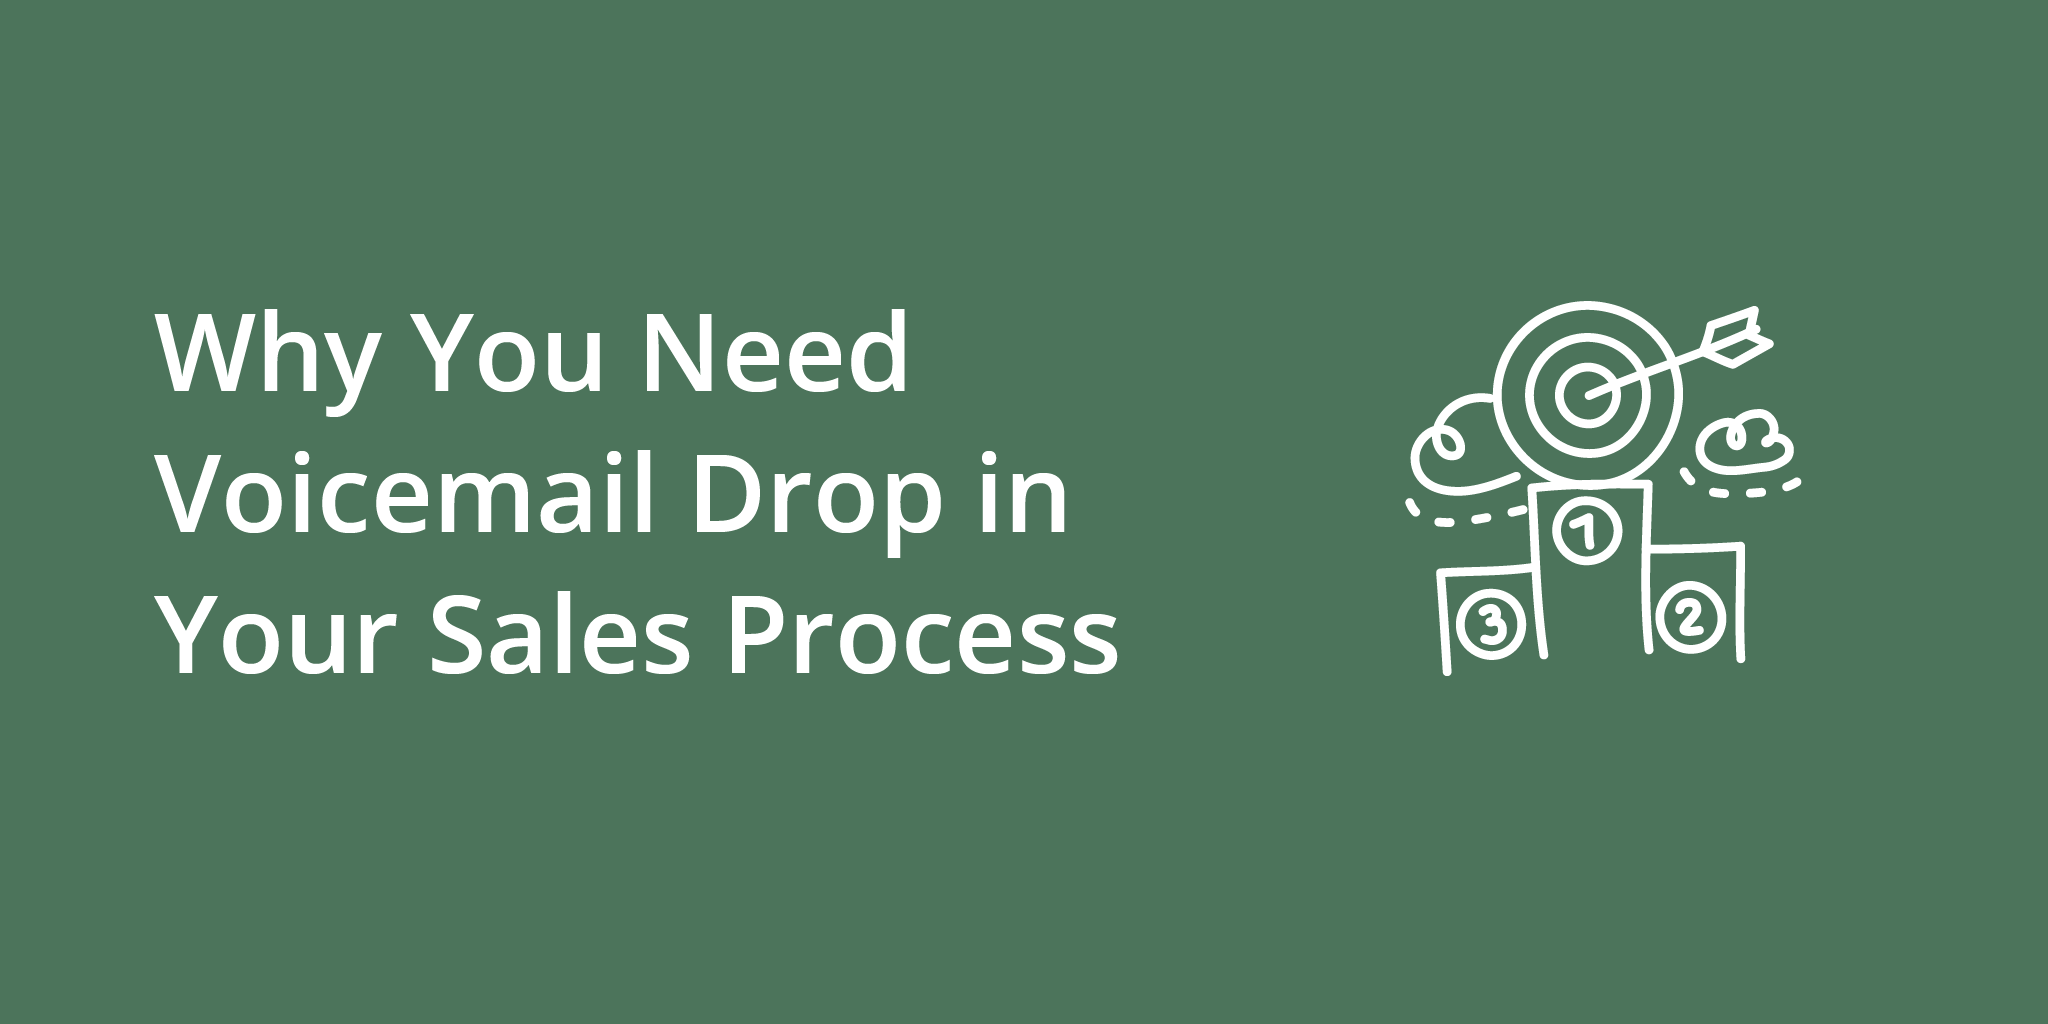 Why You Need Voicemail Drop in Your Sales Process